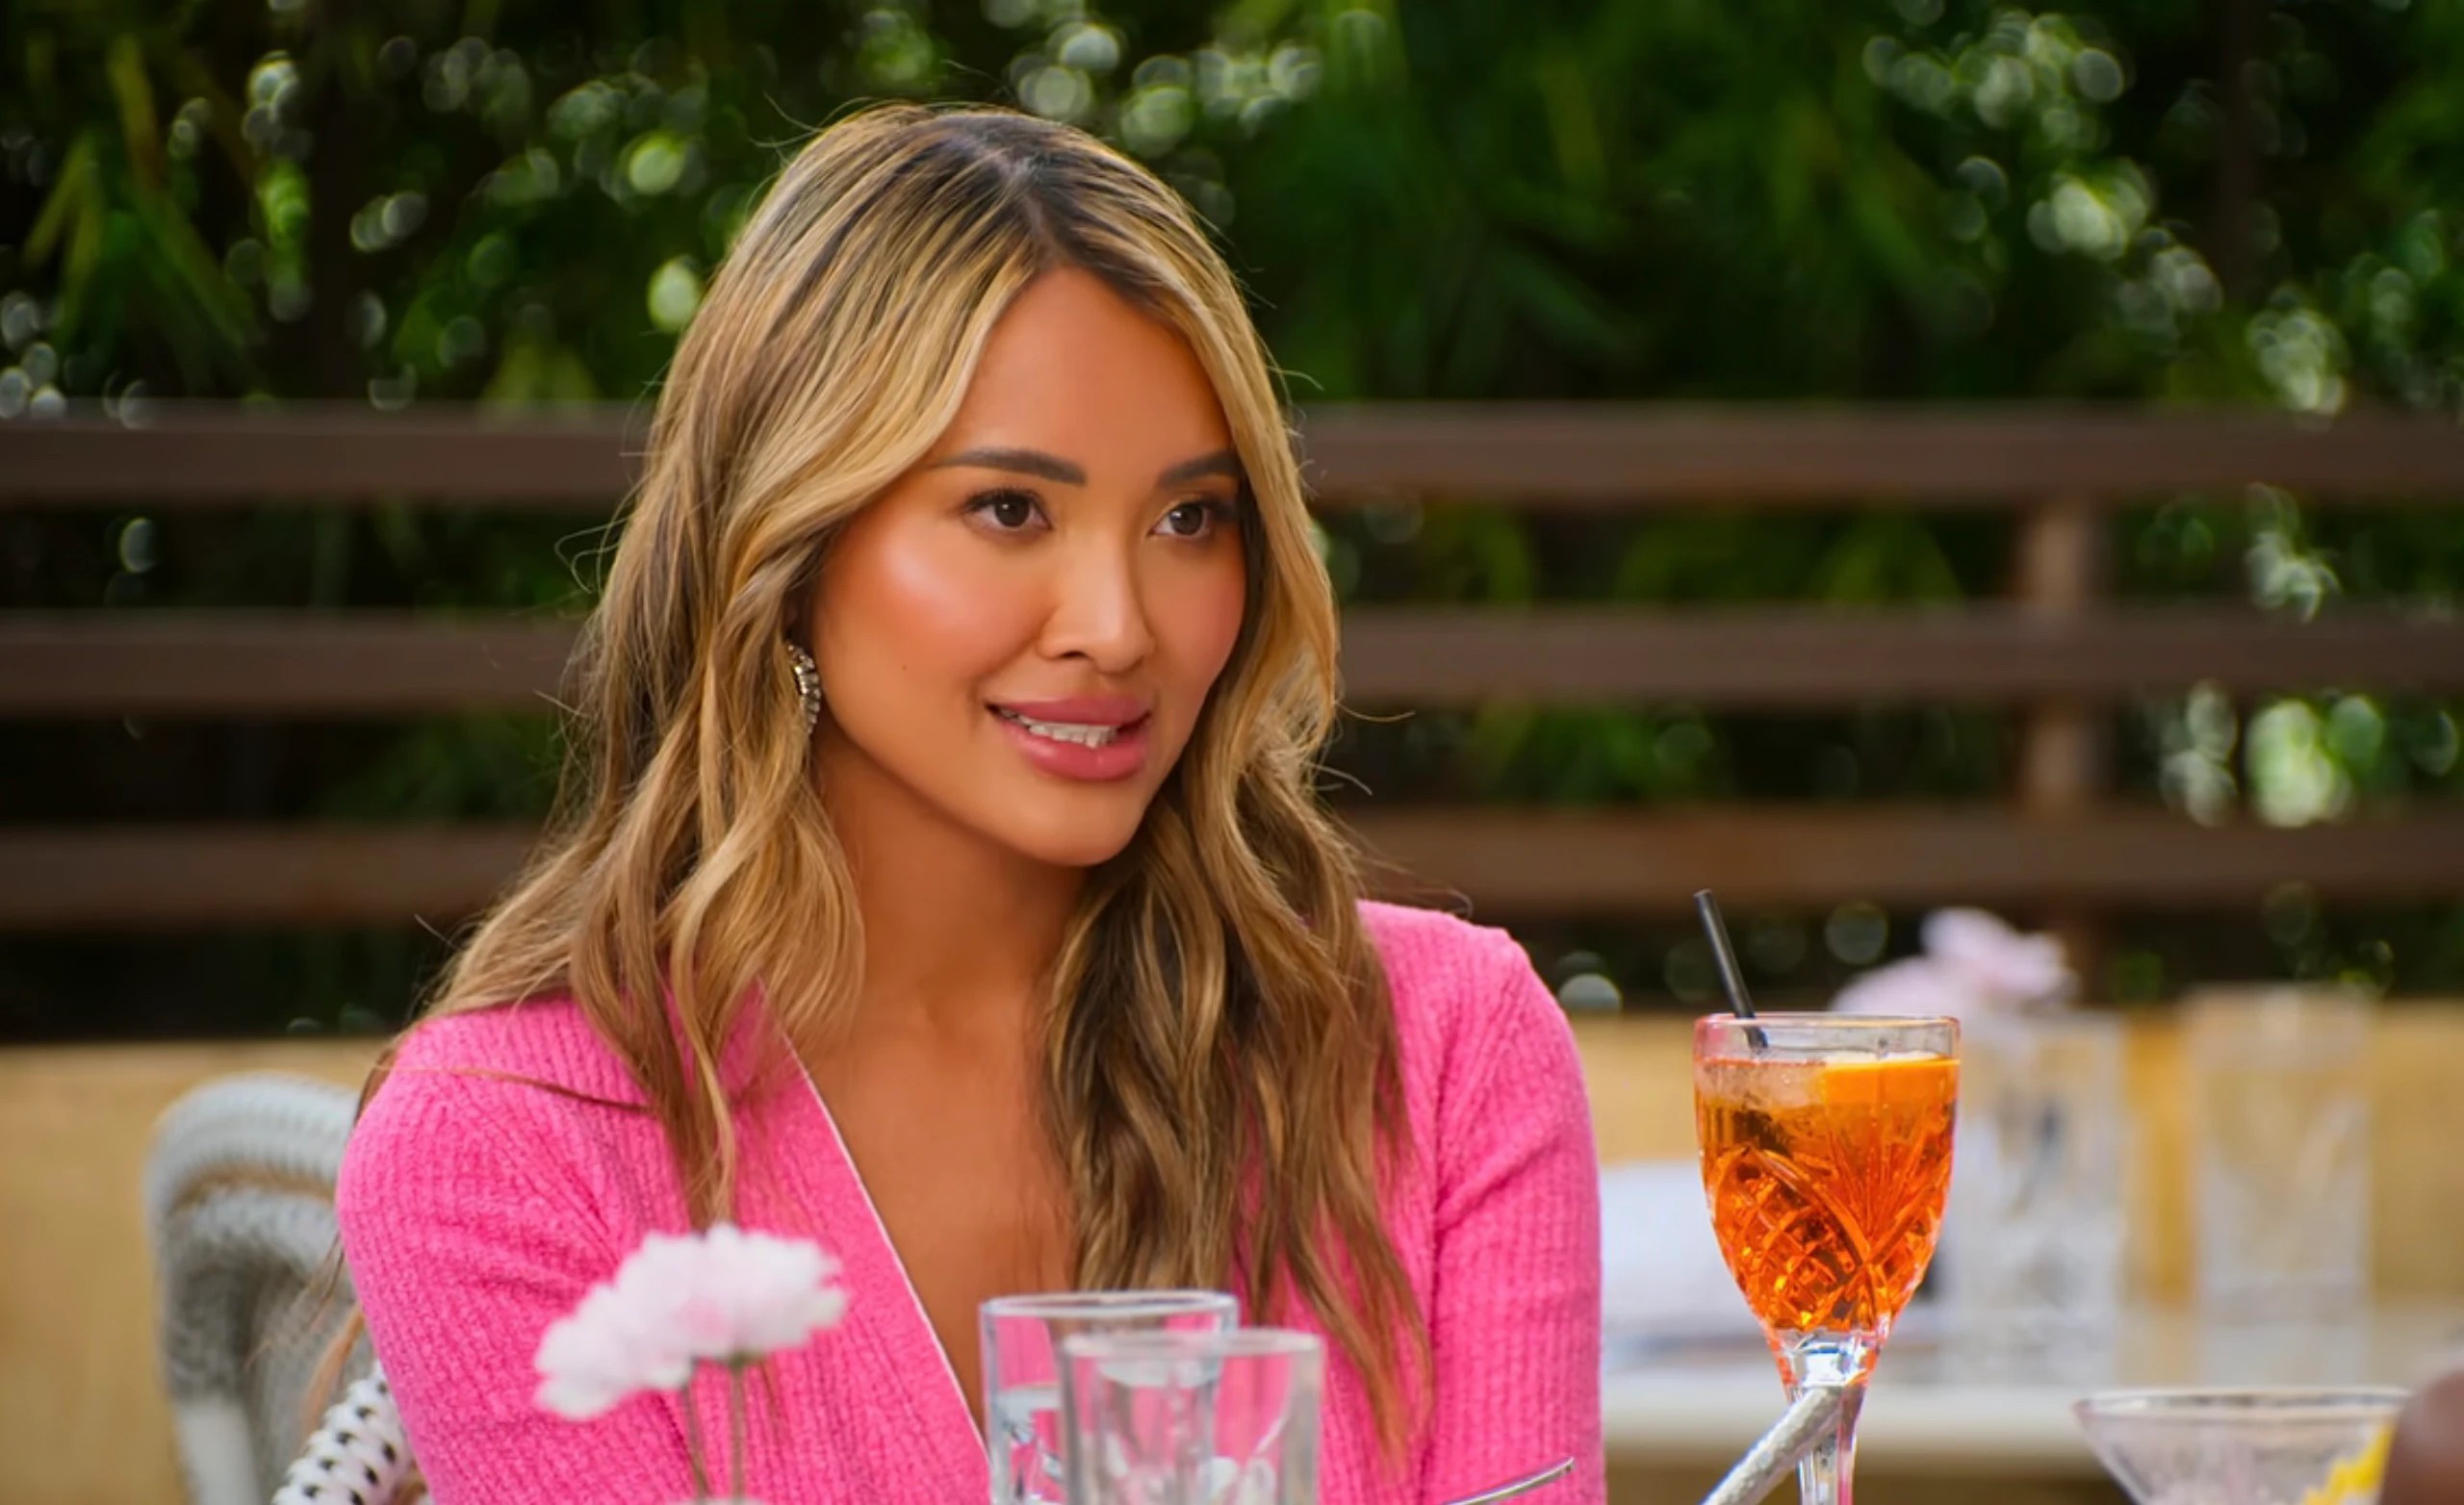 Cassandra From 'Selling Sunset' Appeared On 'Vanderpump Rules'